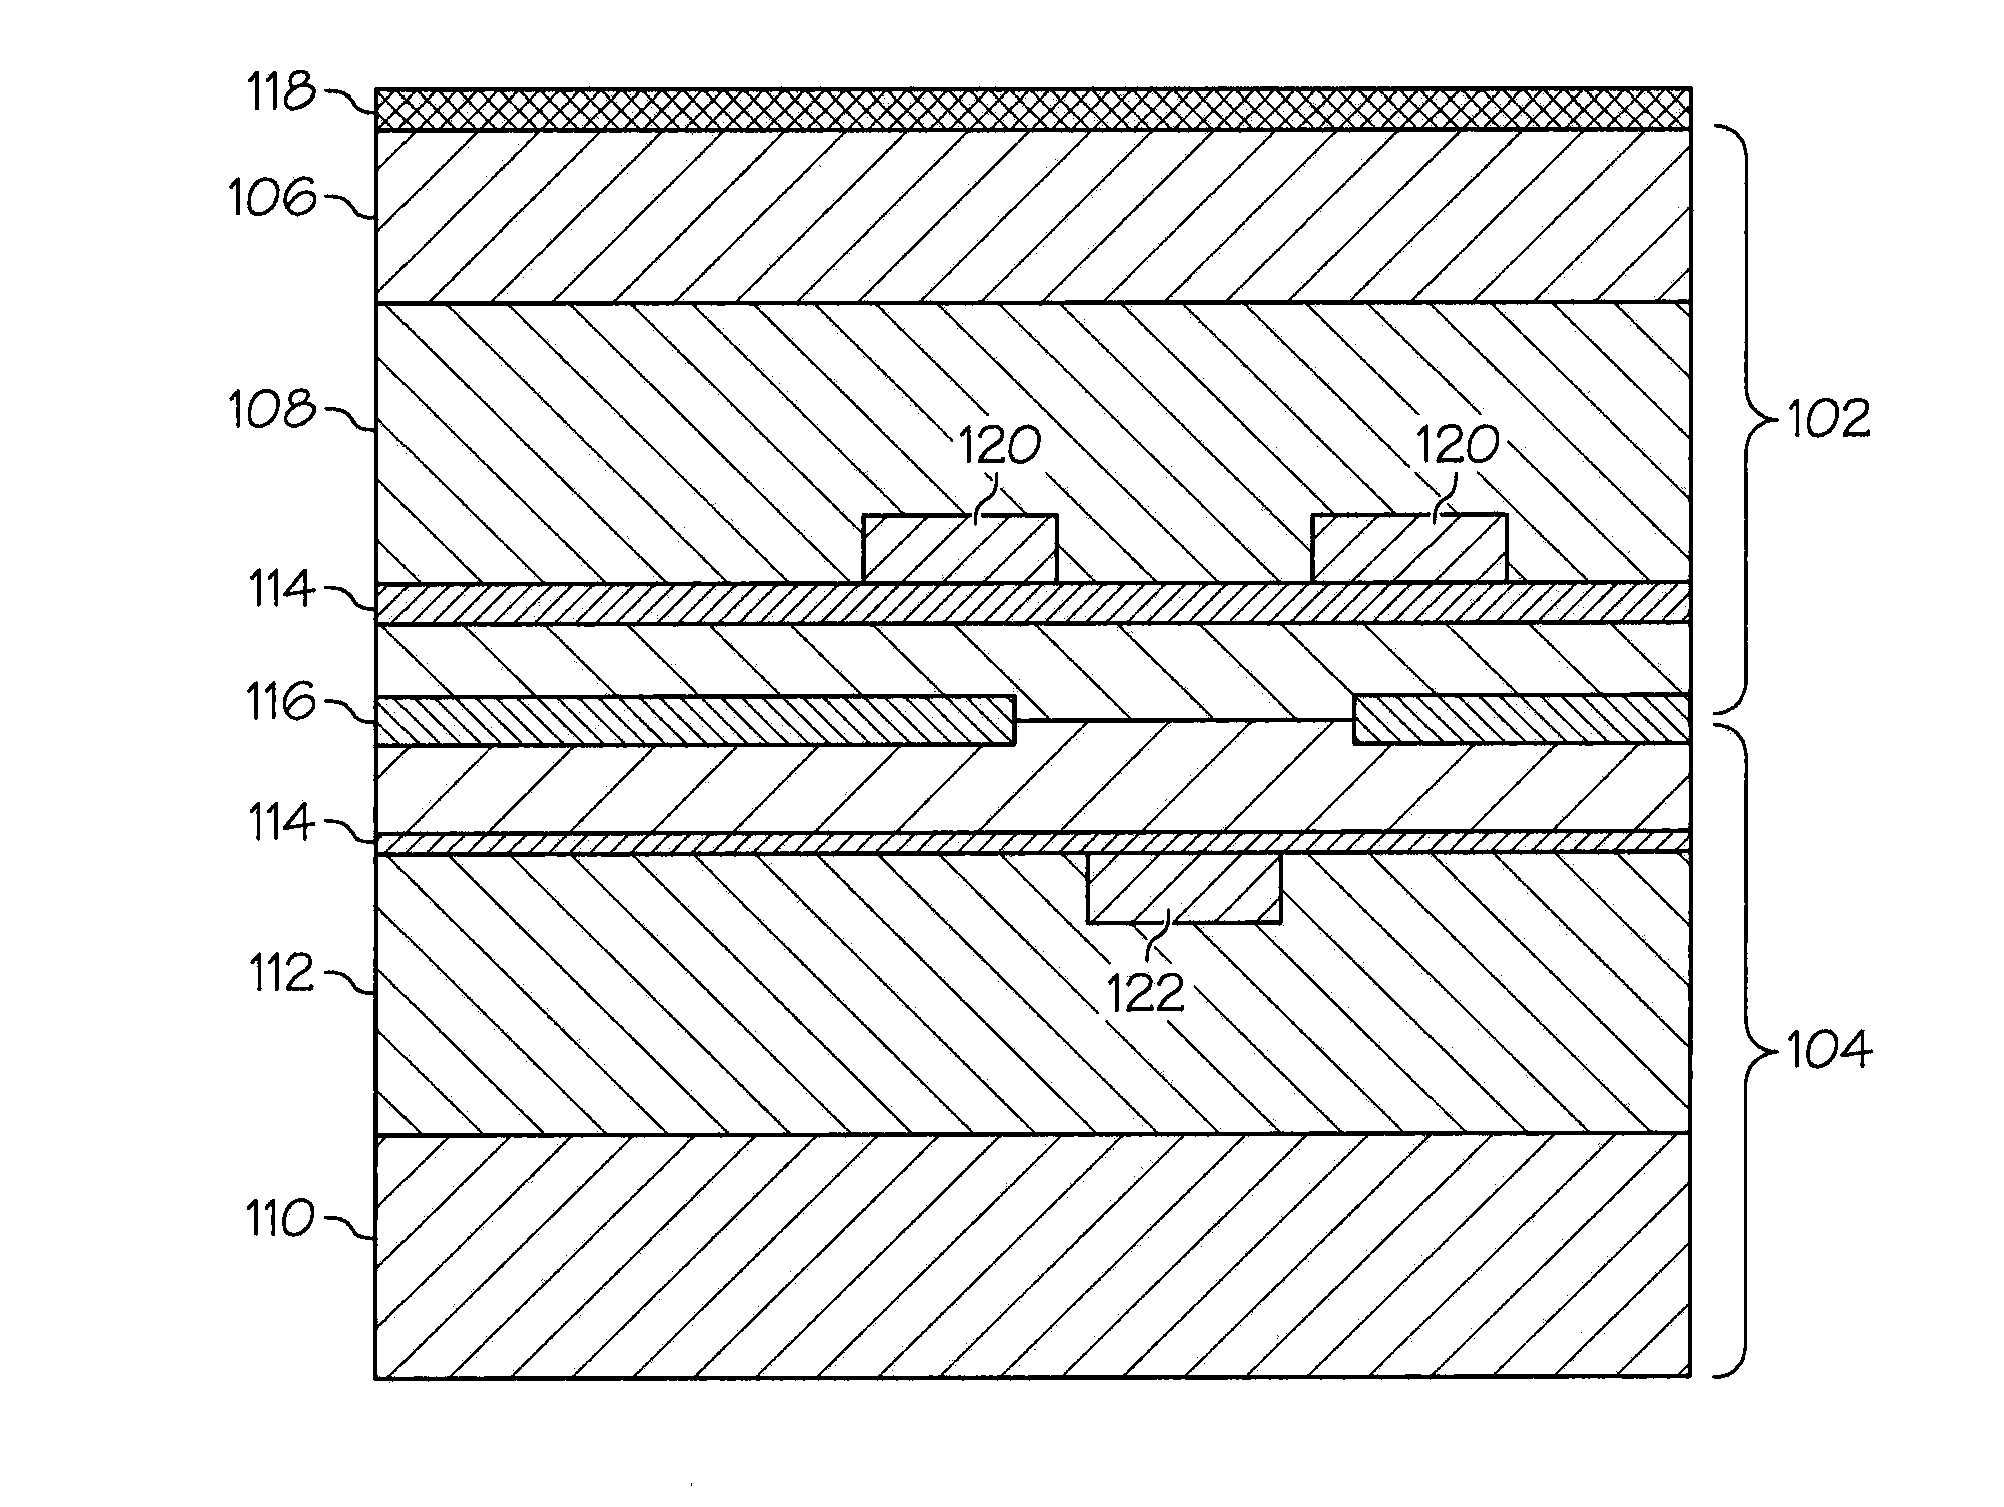 Three Dimensional Integration With Through Silicon Vias Having Multiple Diameters